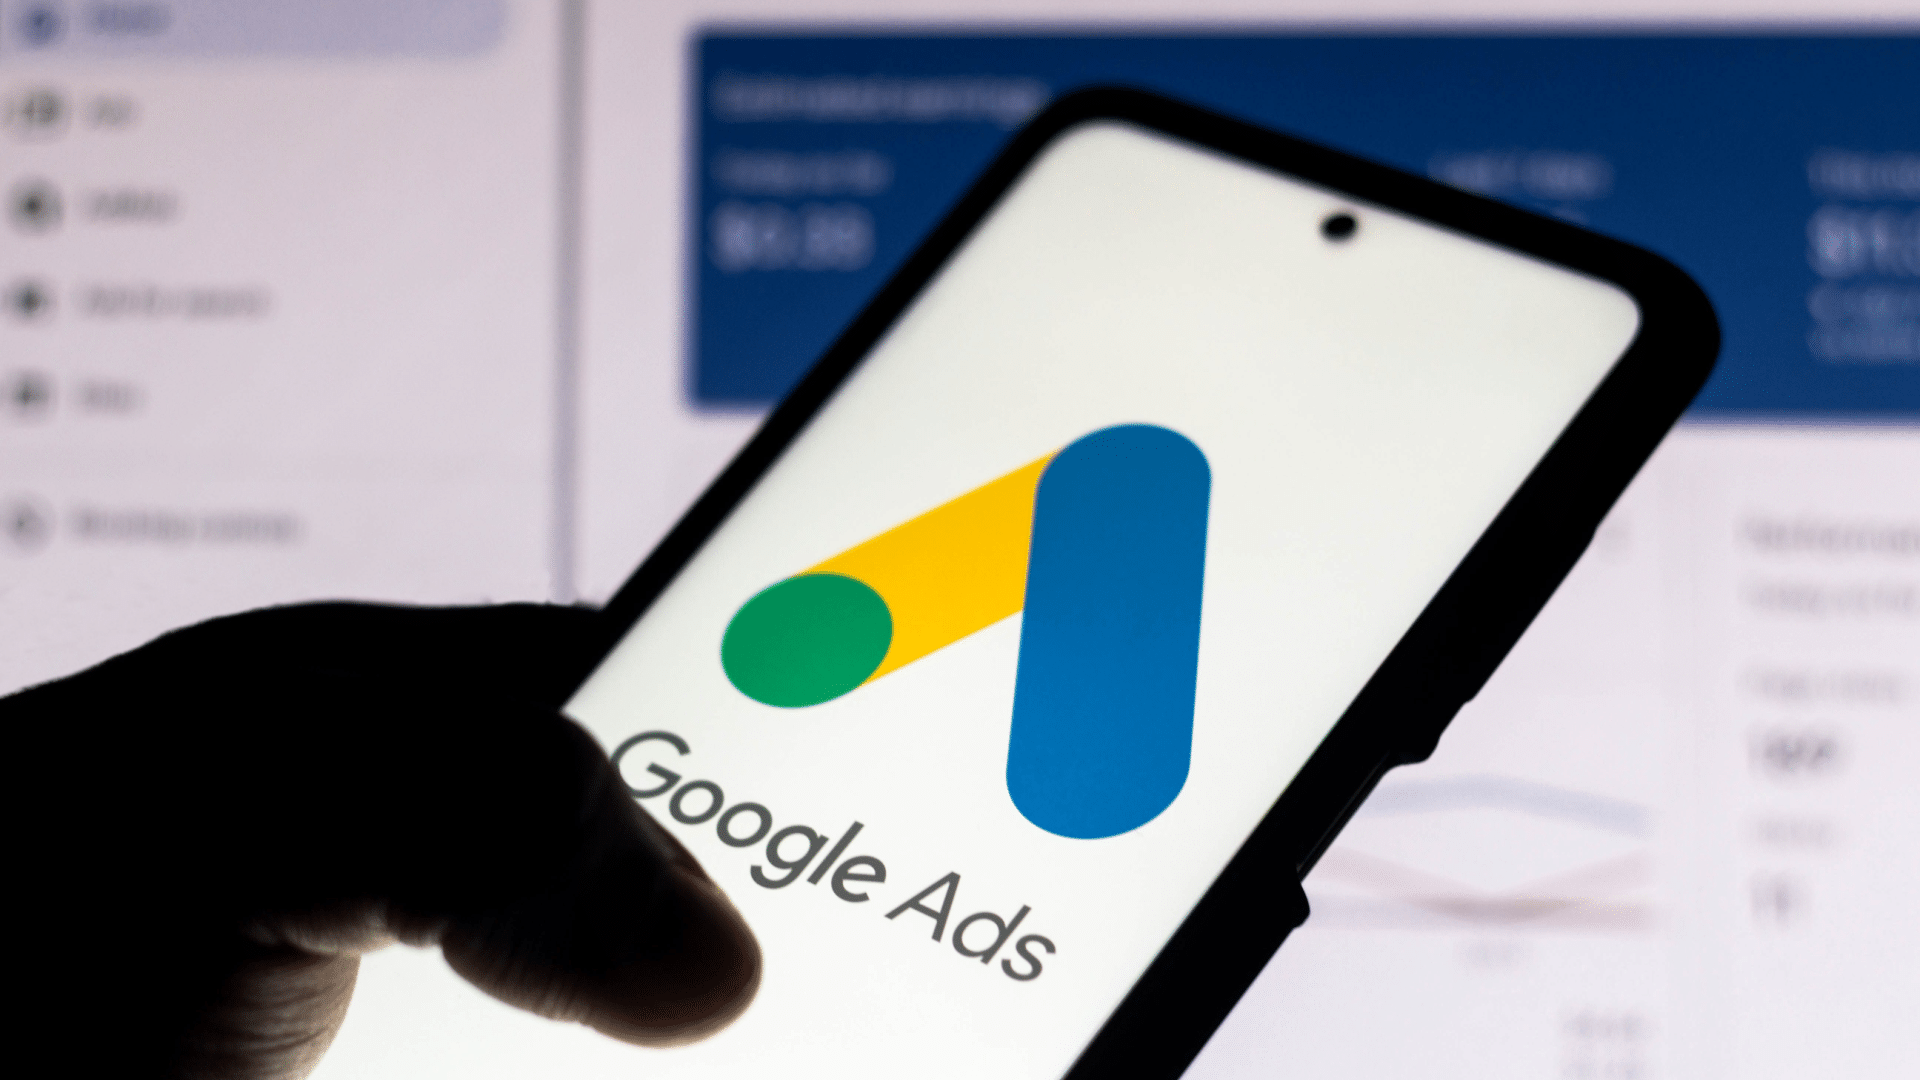 #Google Ads launches email series delivering tailored optimization advice